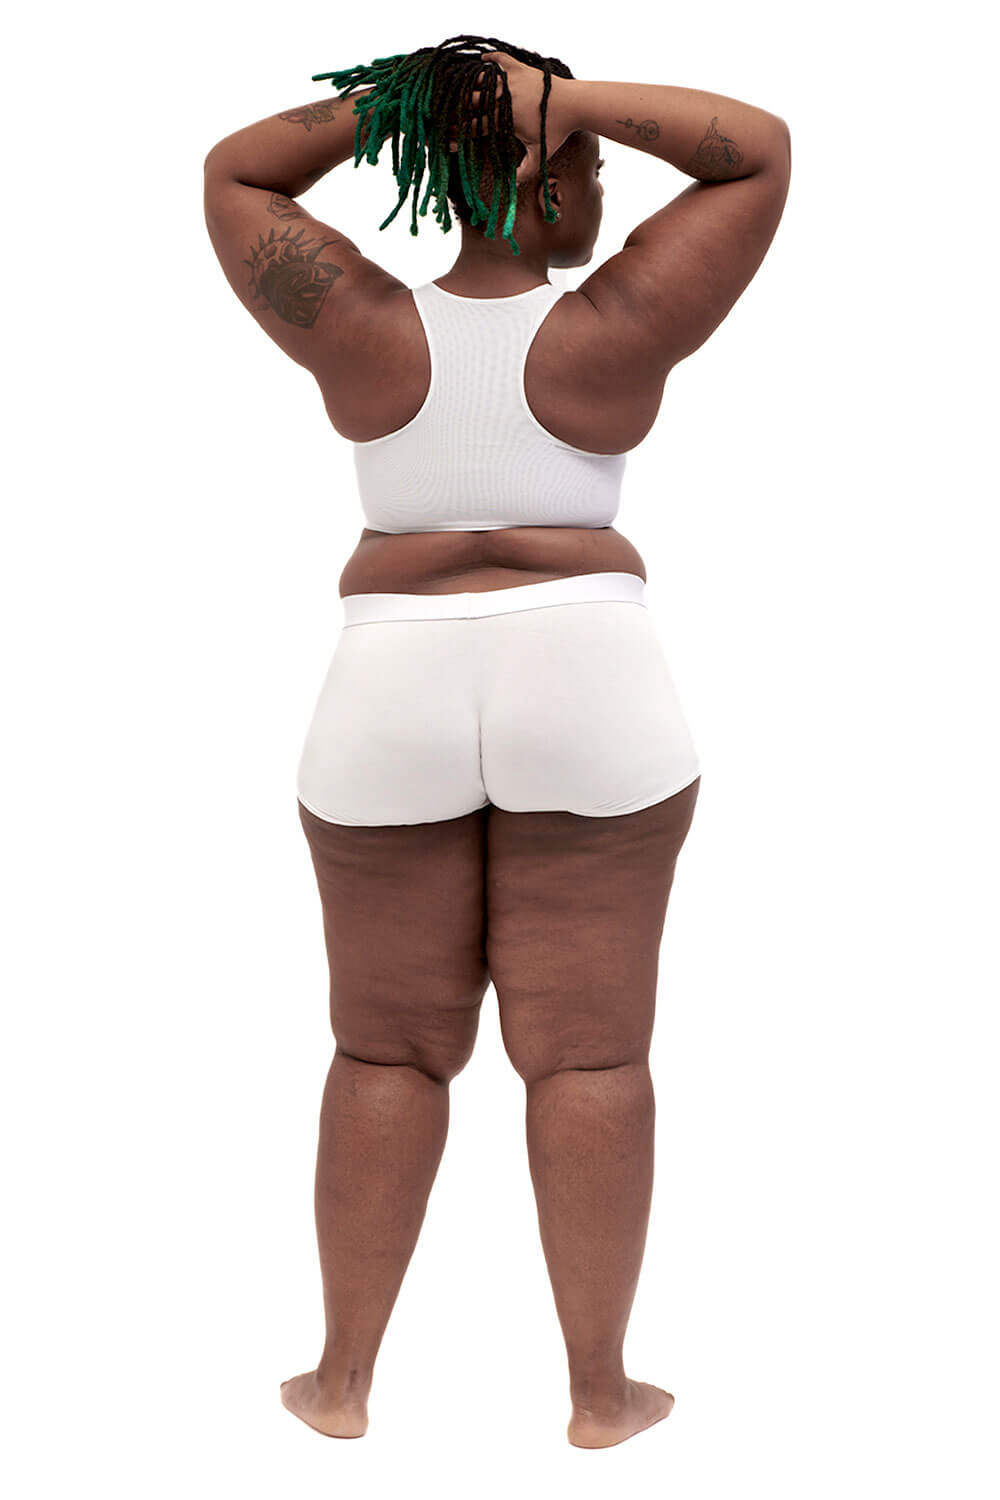 Plus-sized person wearing a white racerback chest binder made from breathable mesh, photographed from the back.